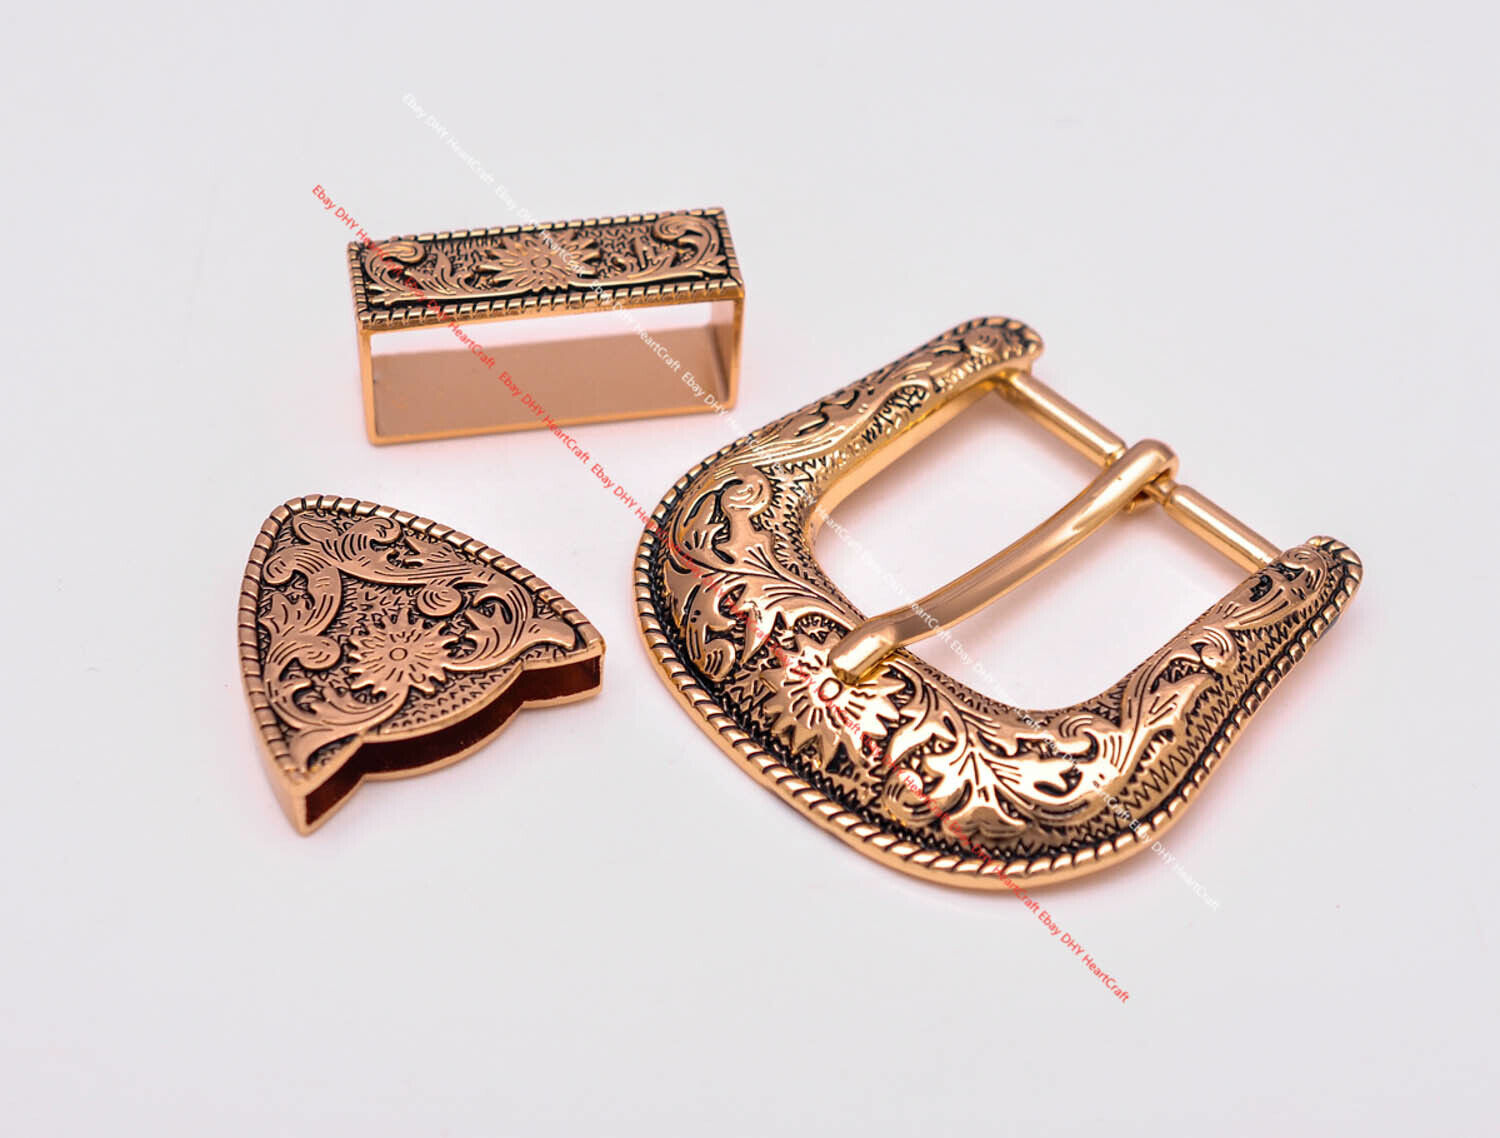 Heavy Gold Western Cowboy Belt Buckle 3 Piece Set Floral Carved Unisex 1-1/2" Unbranded Does not apply - фотография #6